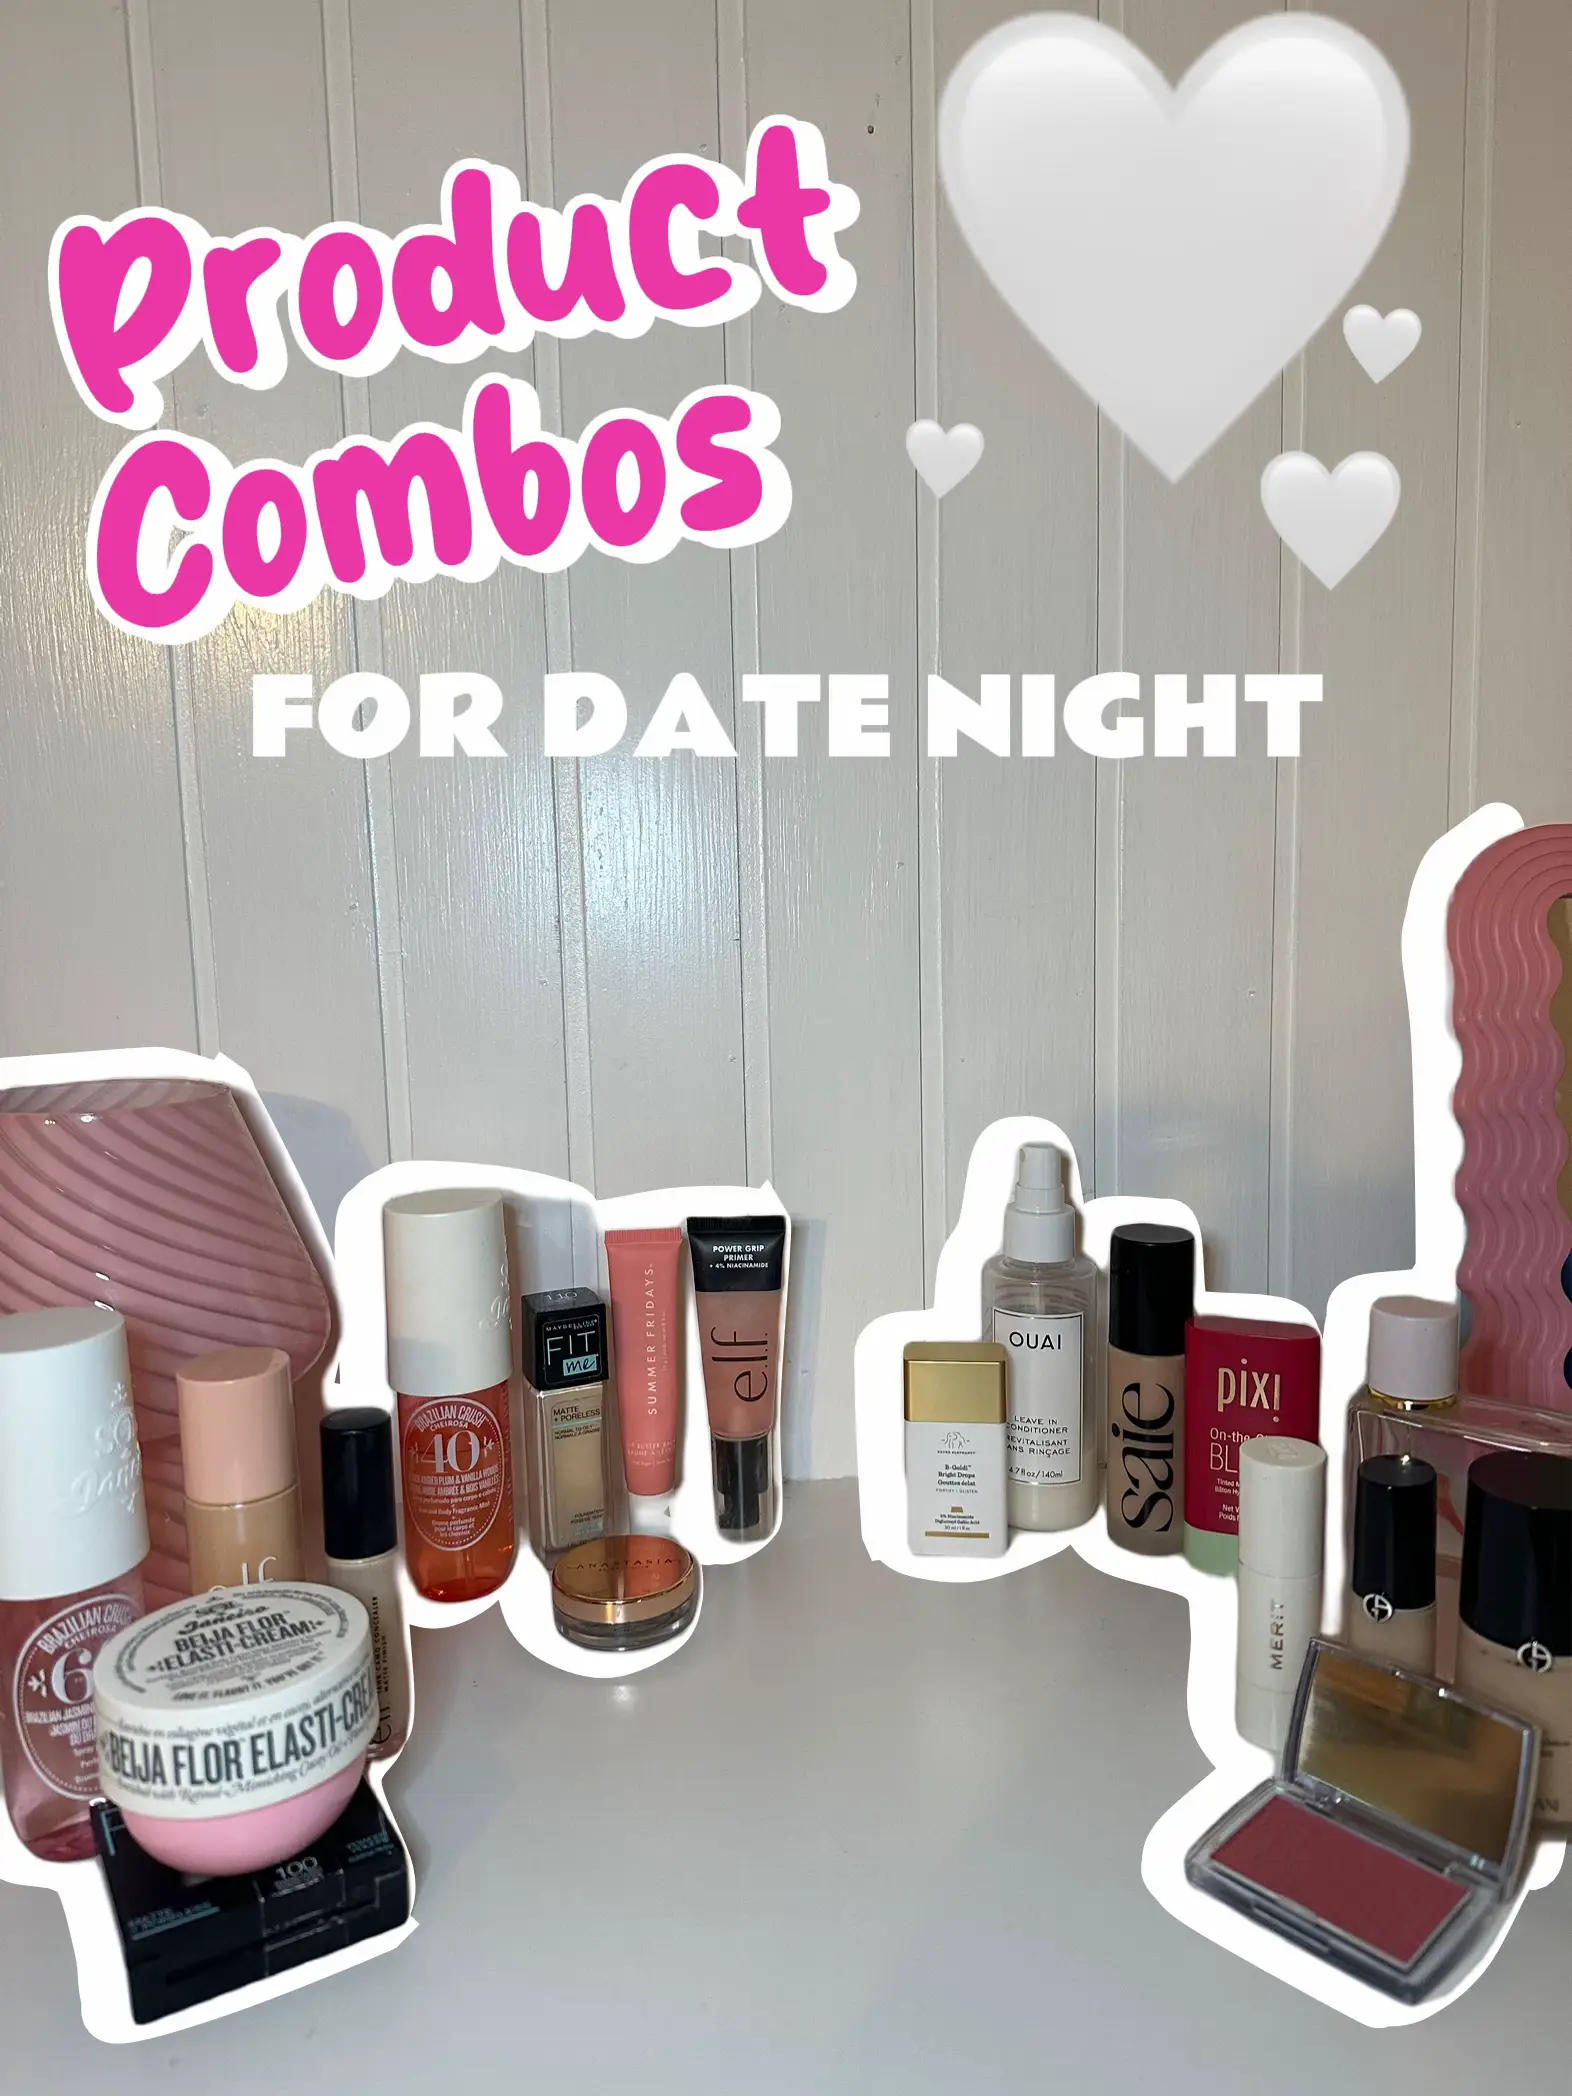  A collection of beauty products for date night.